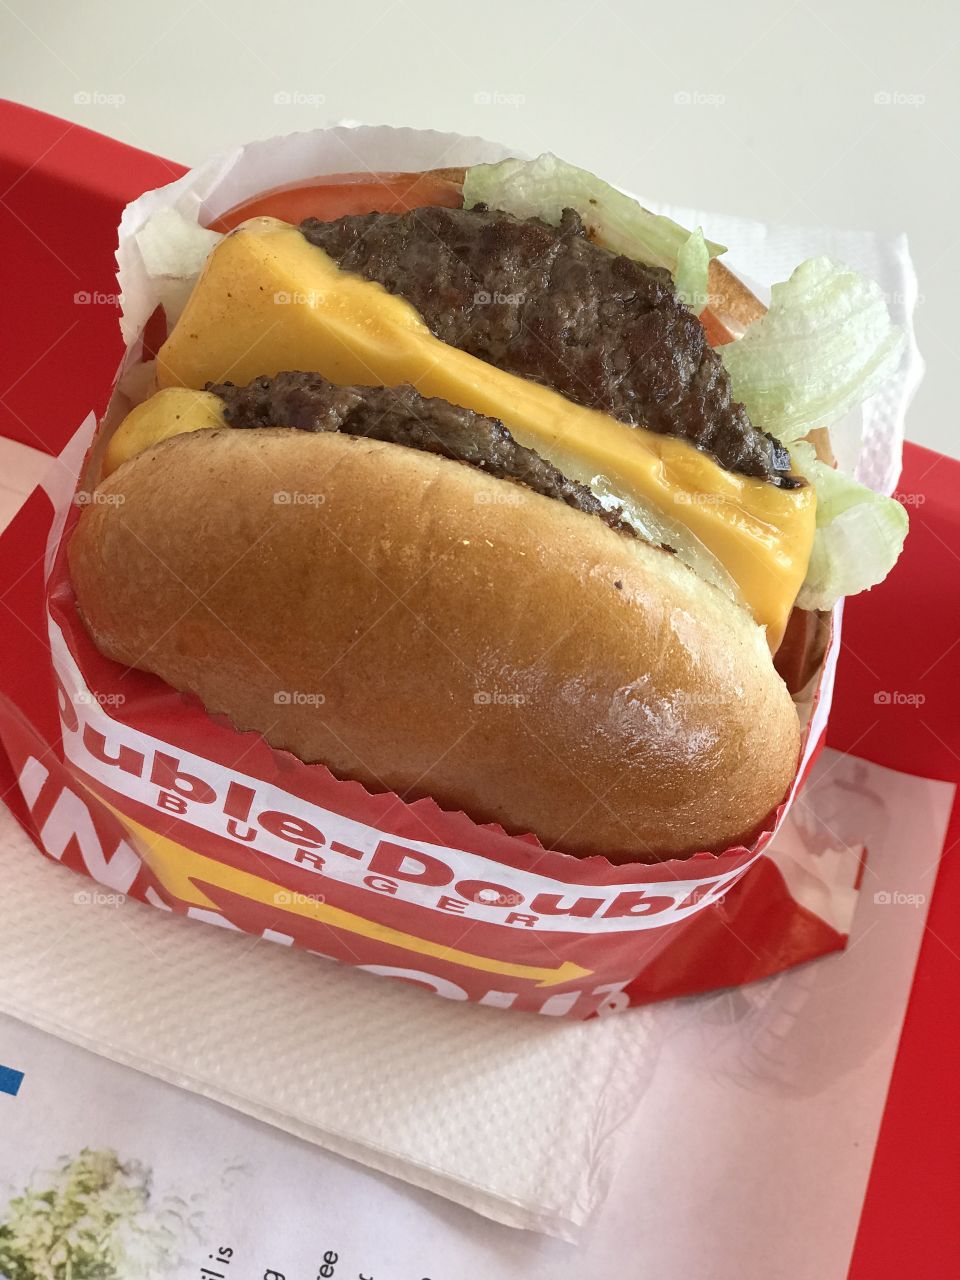 In-n-out burger on a tray